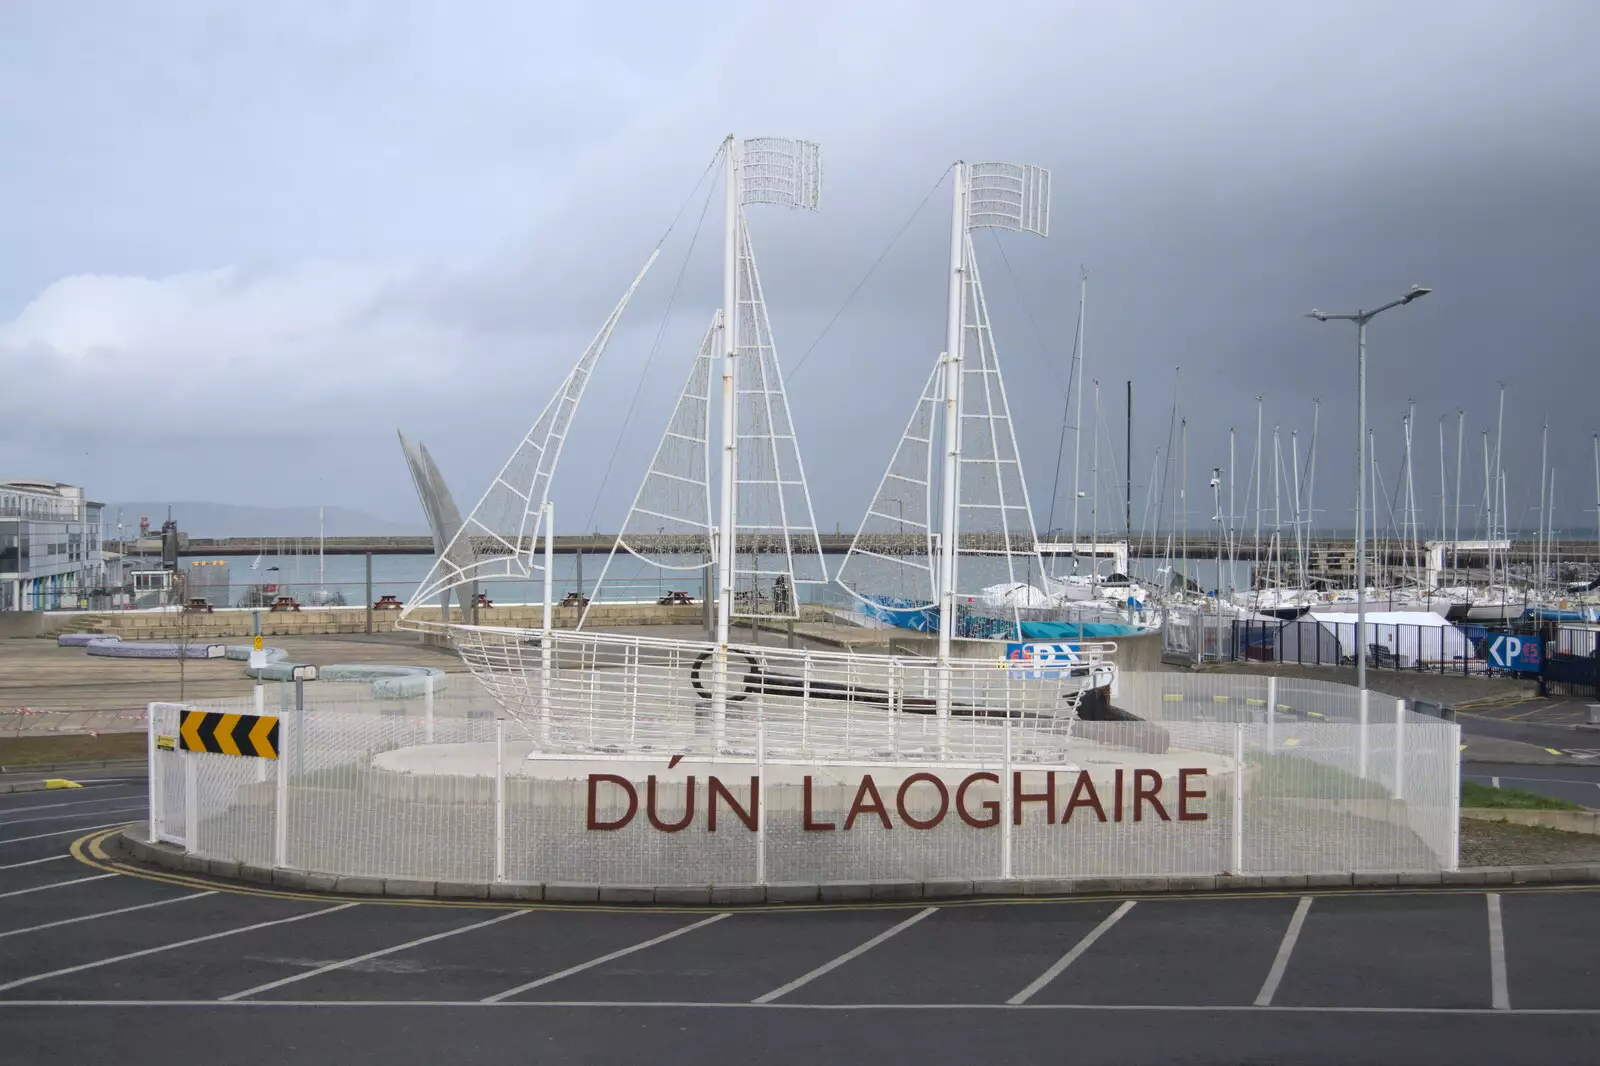 A boat sculpture at Dún Laoghaire, from The End of the Breffni, Blackrock, Dublin - 18th February 2023